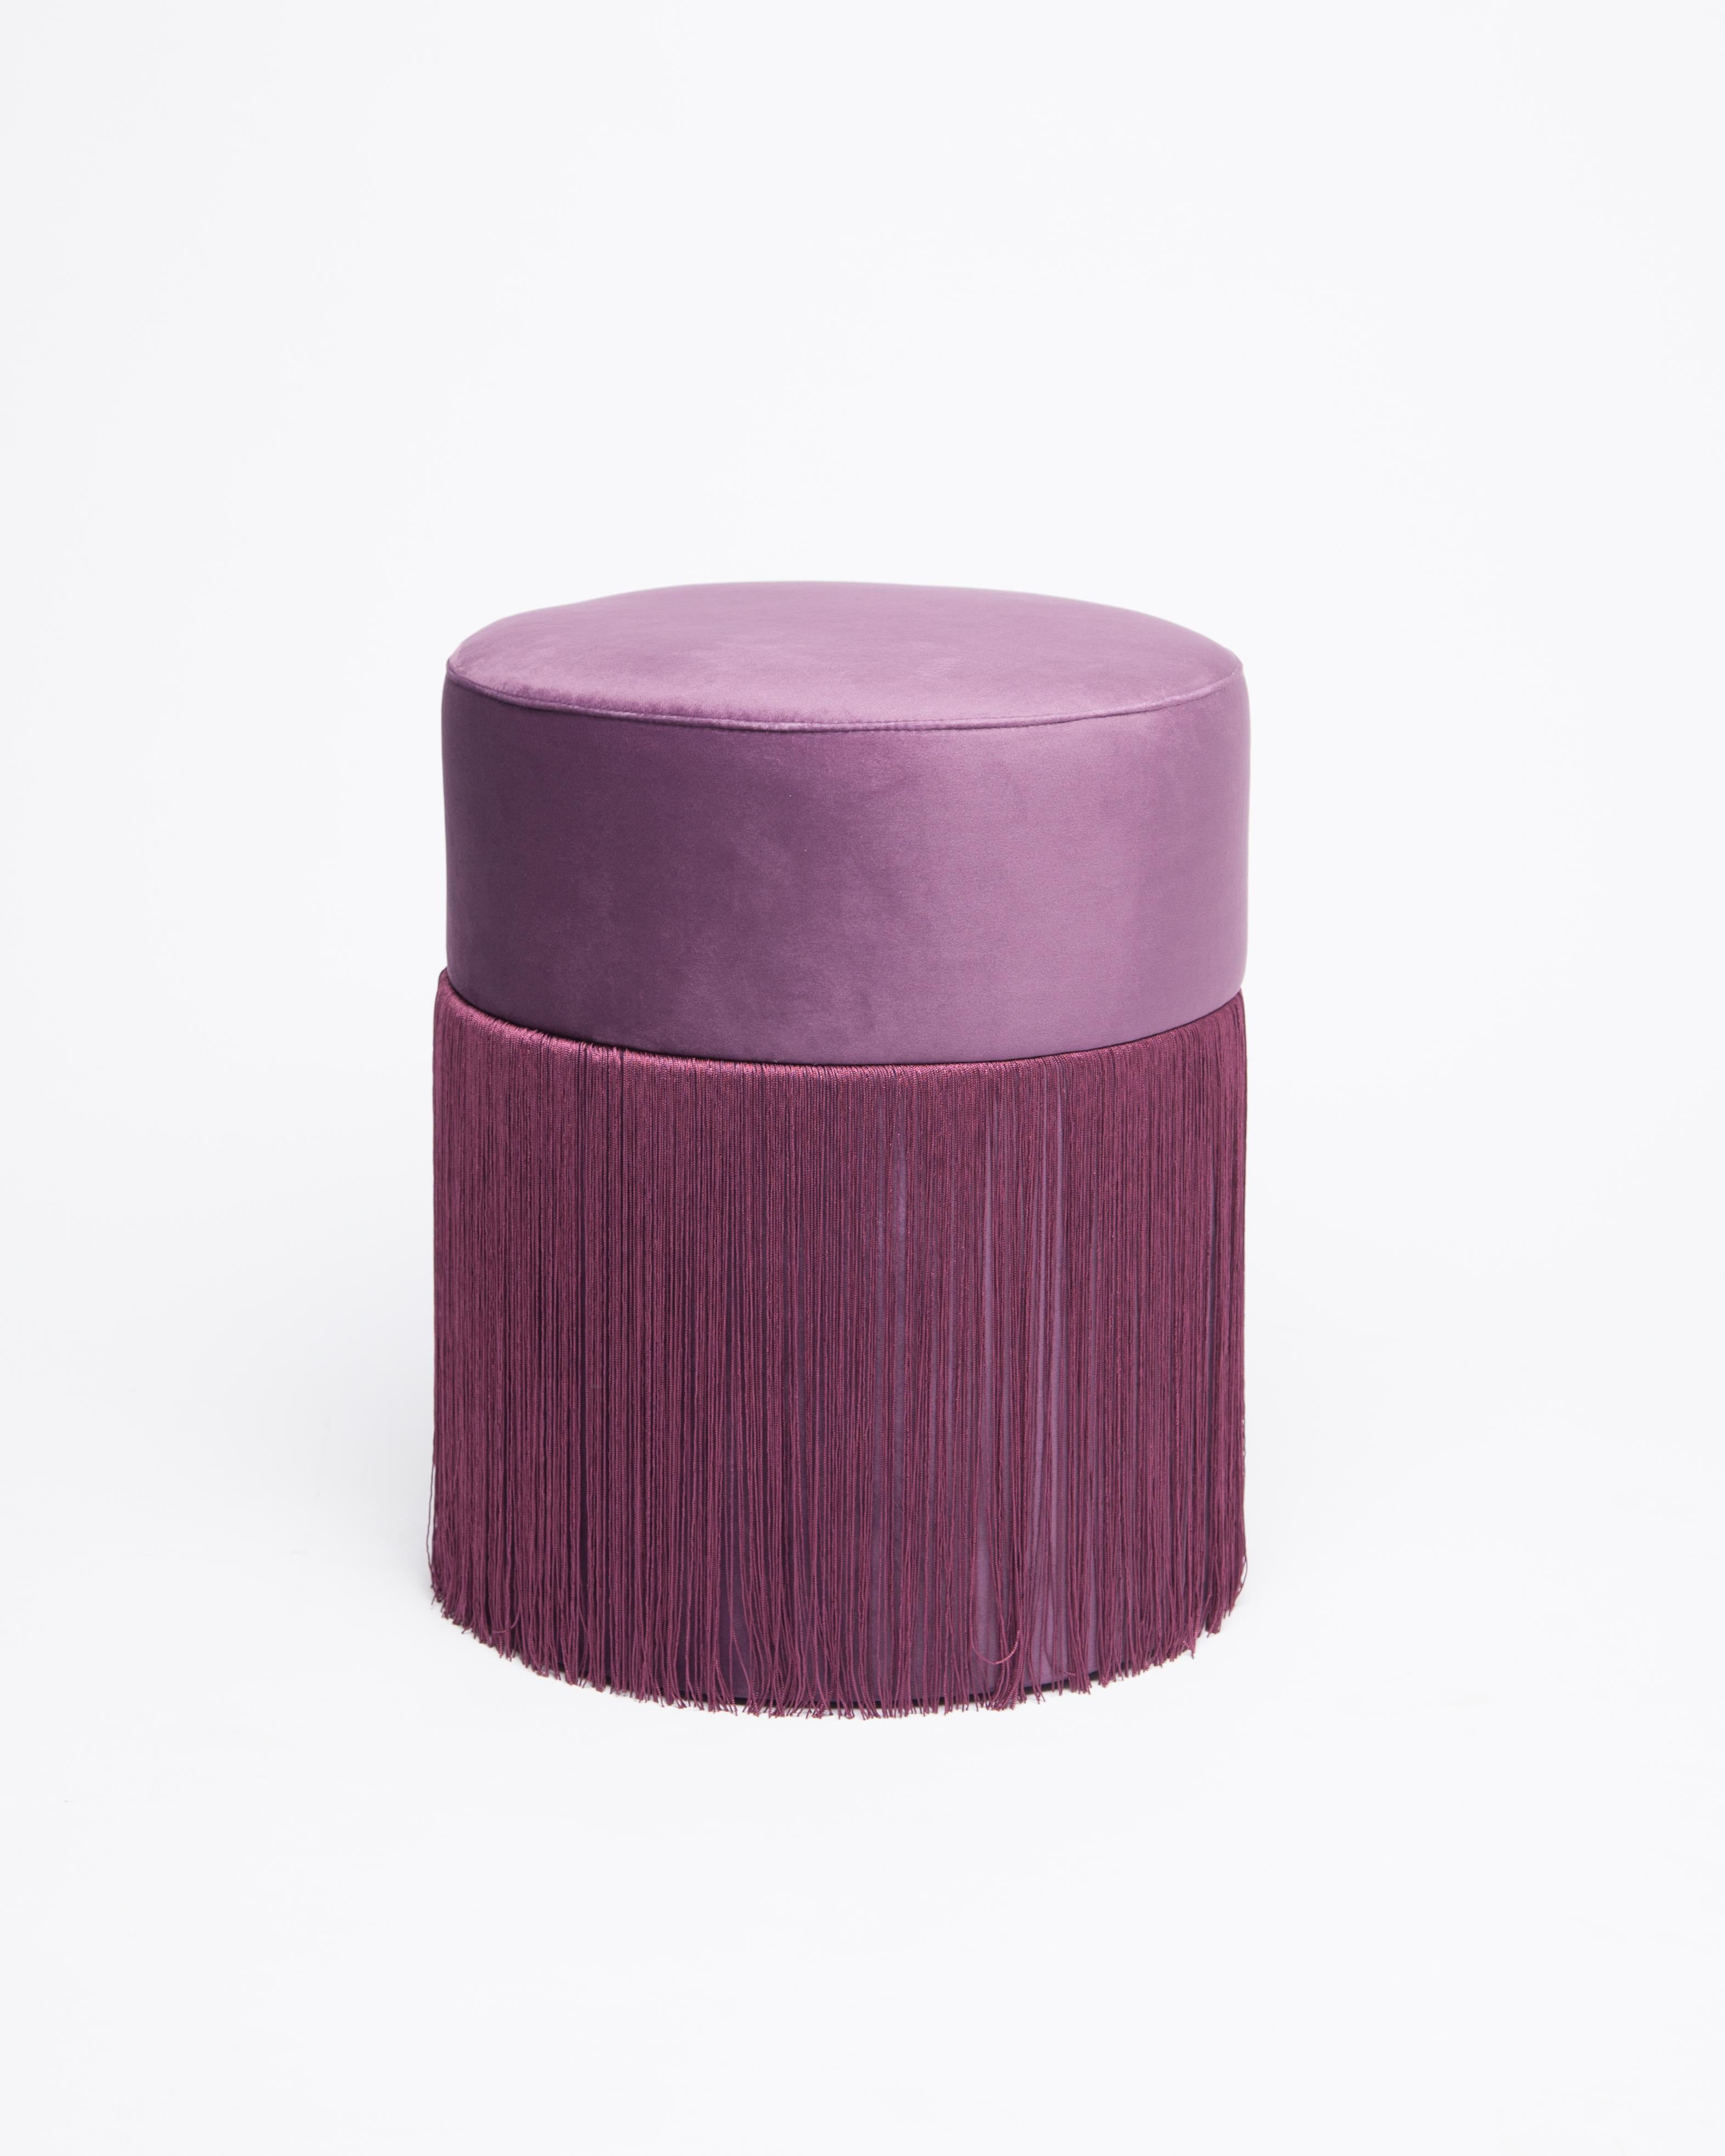 Pouf Pill Purple in Velvet Upholstery with Fringes In New Condition For Sale In Firenze, IT